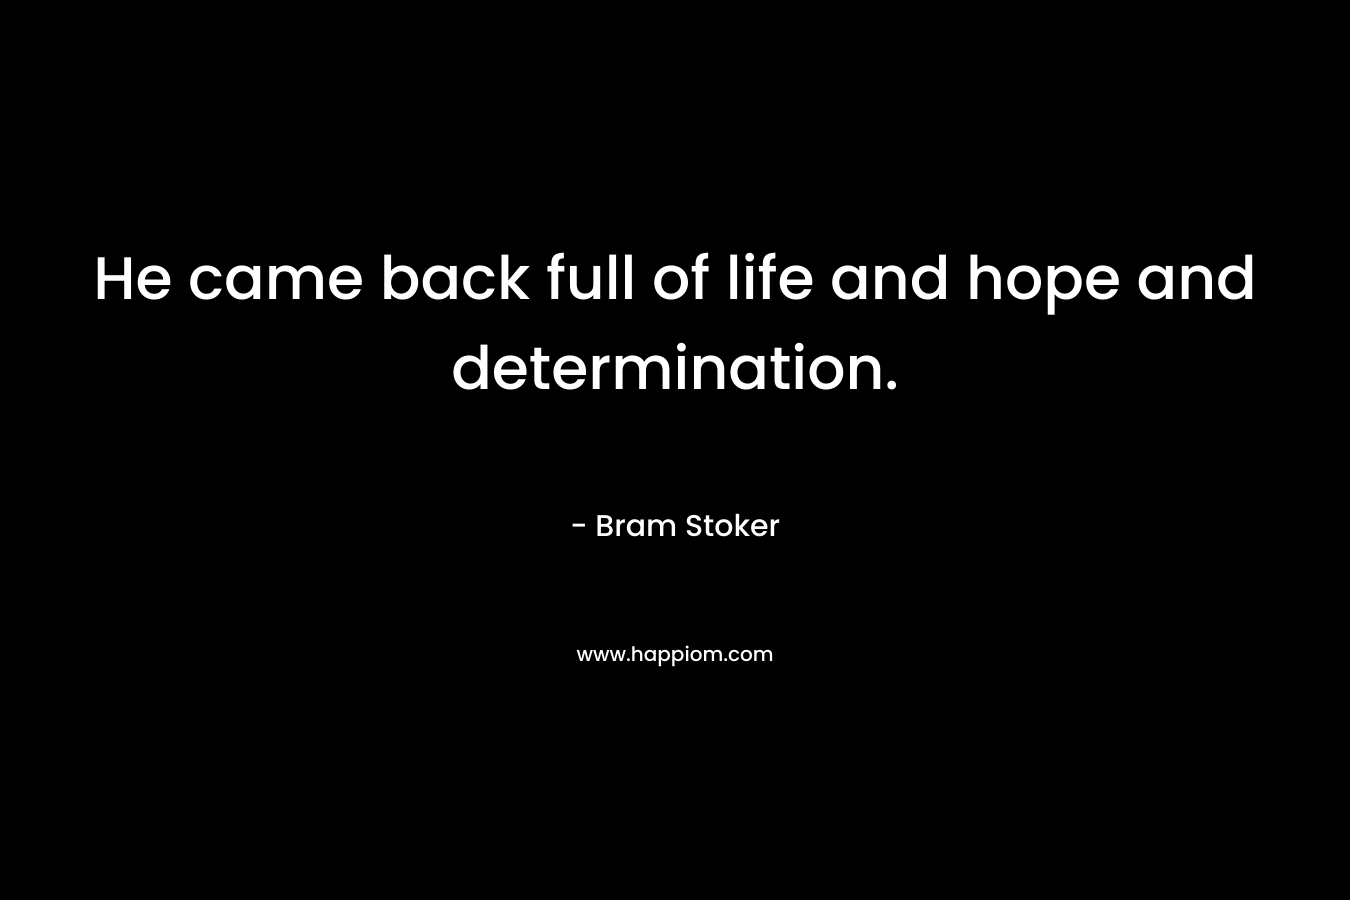 He came back full of life and hope and determination. – Bram Stoker